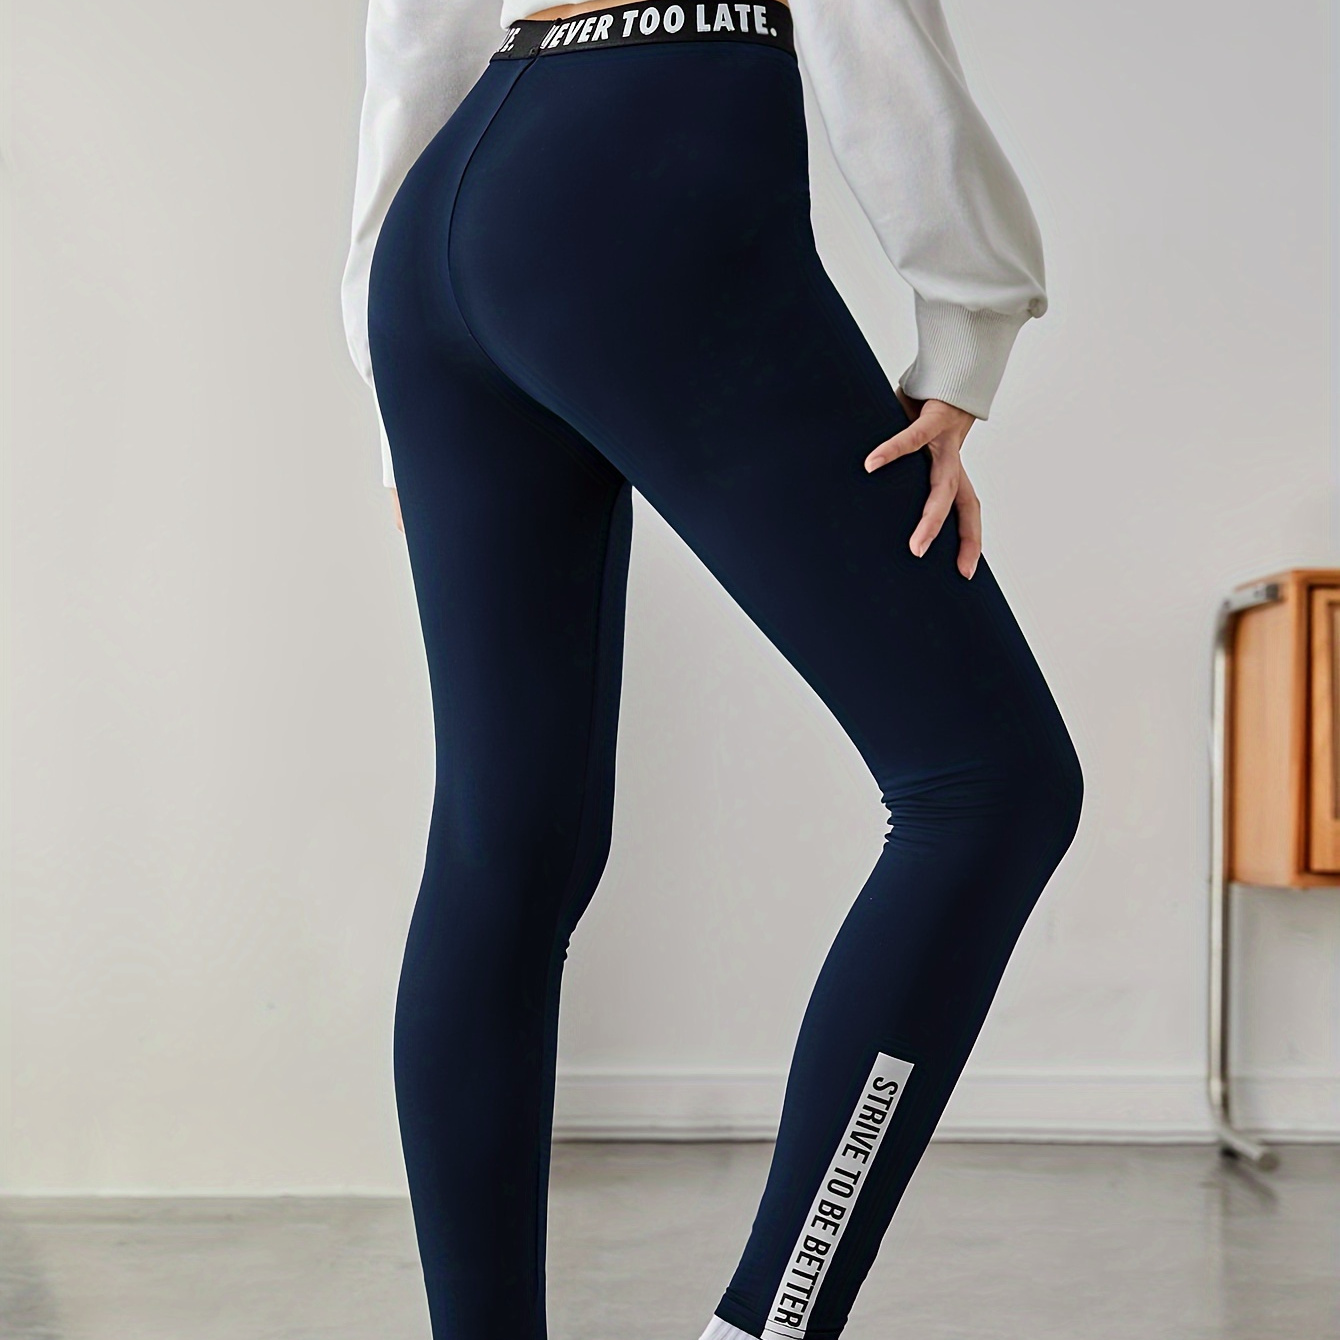 

Girls High Stretch & Stylish & Fit Strive To Be Better Print Leggings For Exercise & Yoga